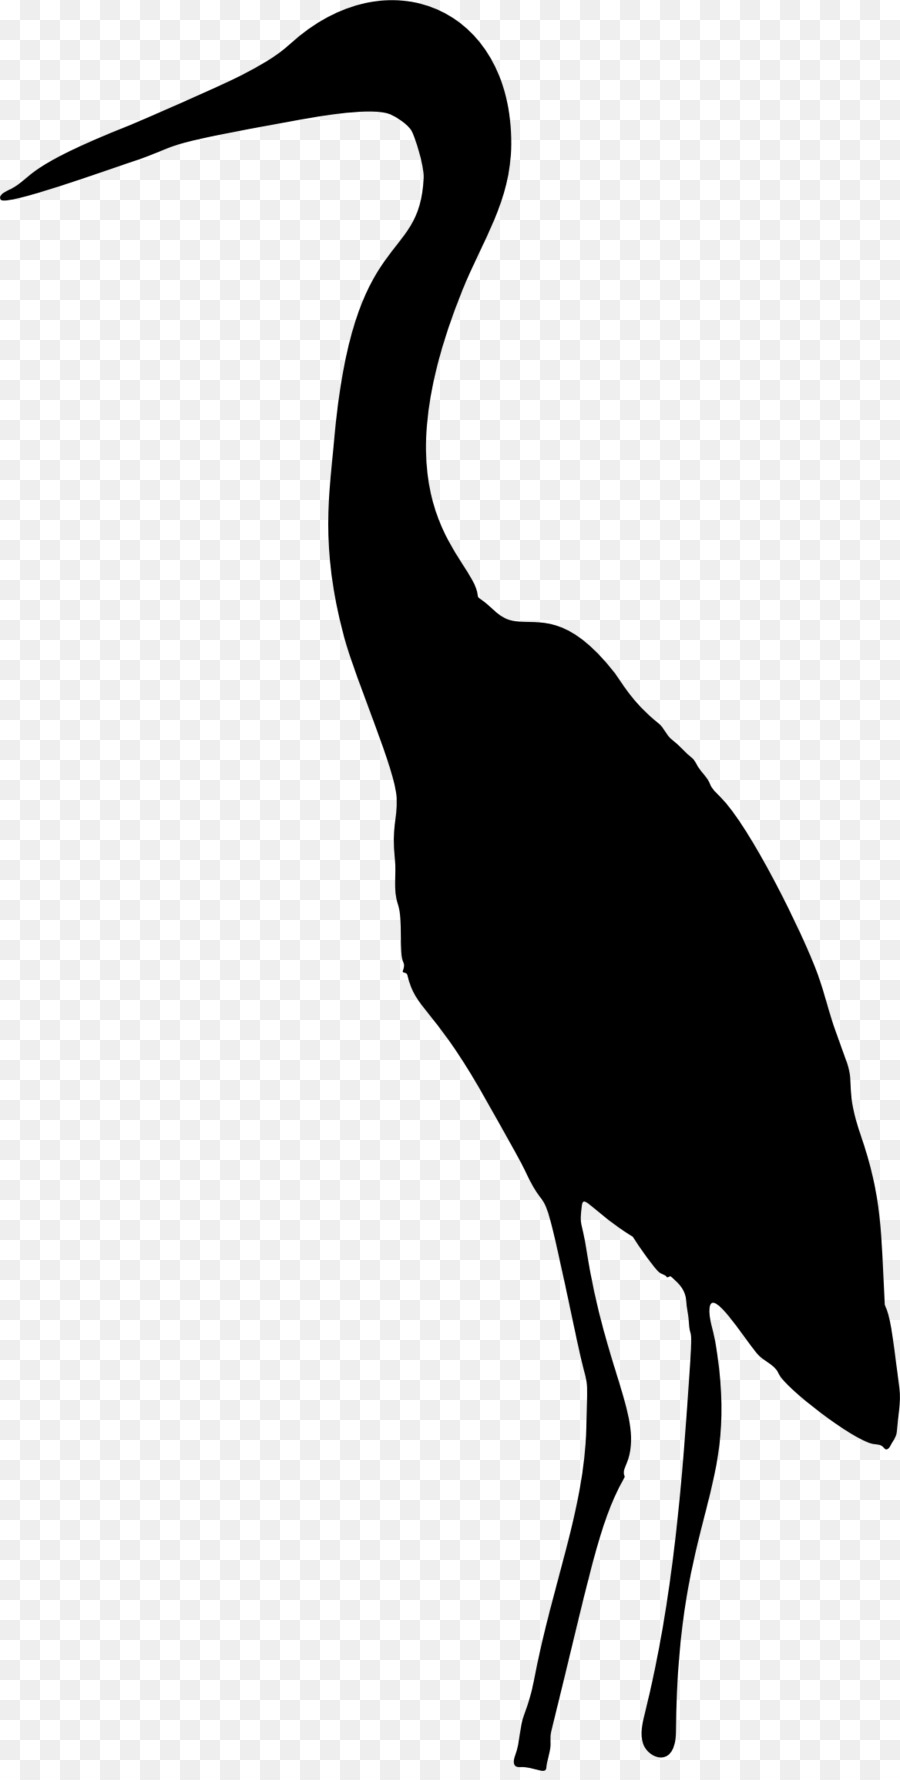 Heron Silhouette Clip art - animal silhouettes png download - 1168*2298 - Free Transparent Heron png Download.